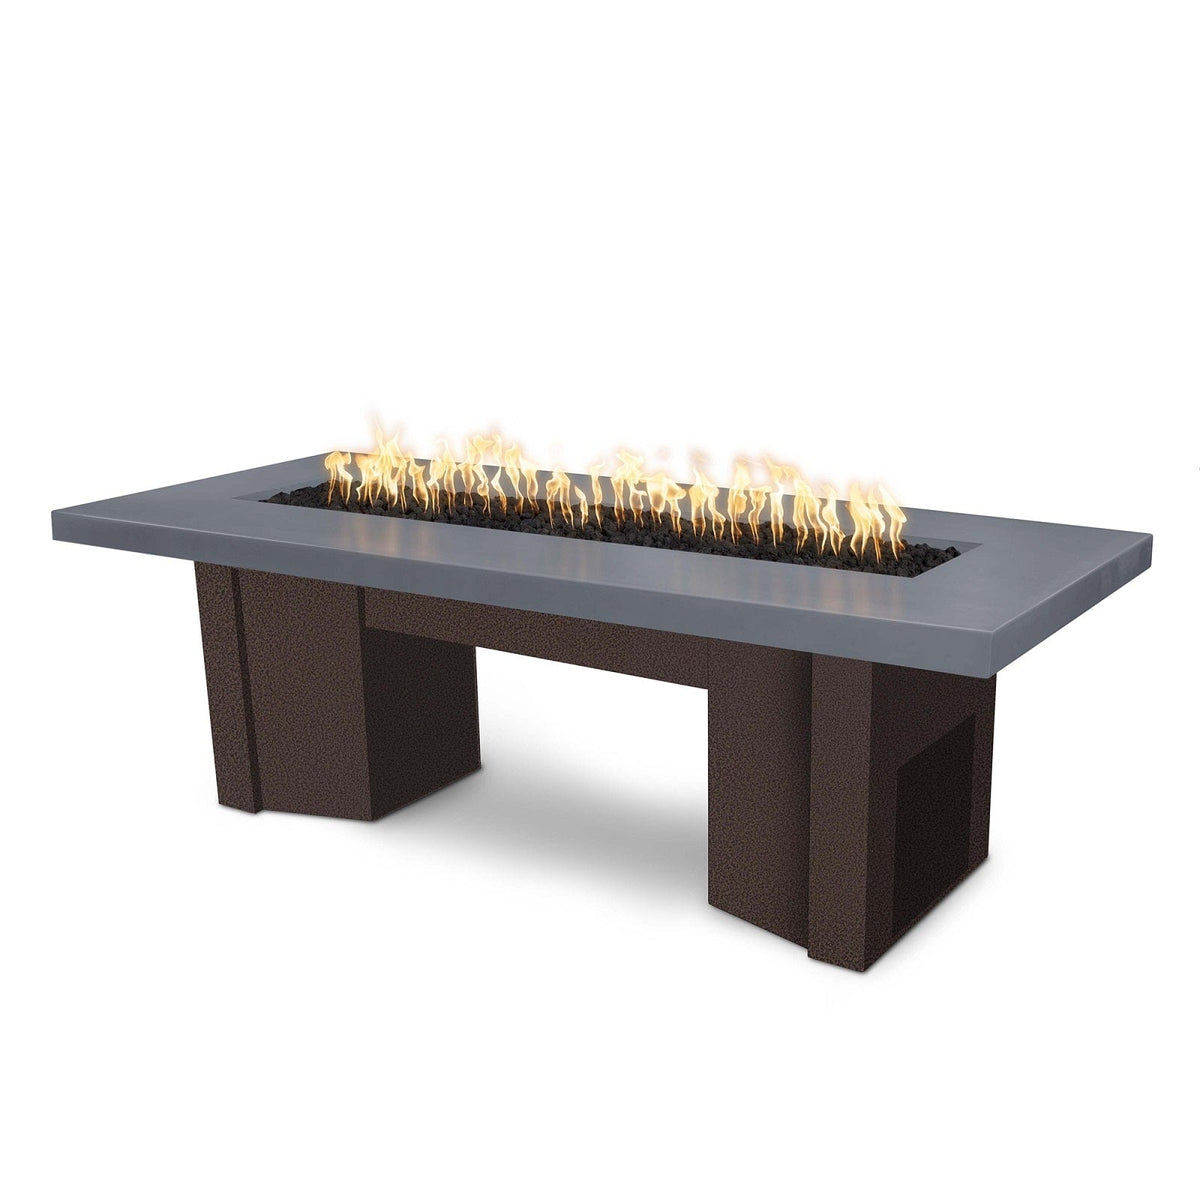 The Outdoor Plus Fire Features Gray (-GRY) / Copper Vein Powder Coated Steel (-CPV) The Outdoor Plus 78&quot; Alameda Fire Table Smooth Concrete in Natural Gas - Match Lit / OPT-ALMGFRC78-NG